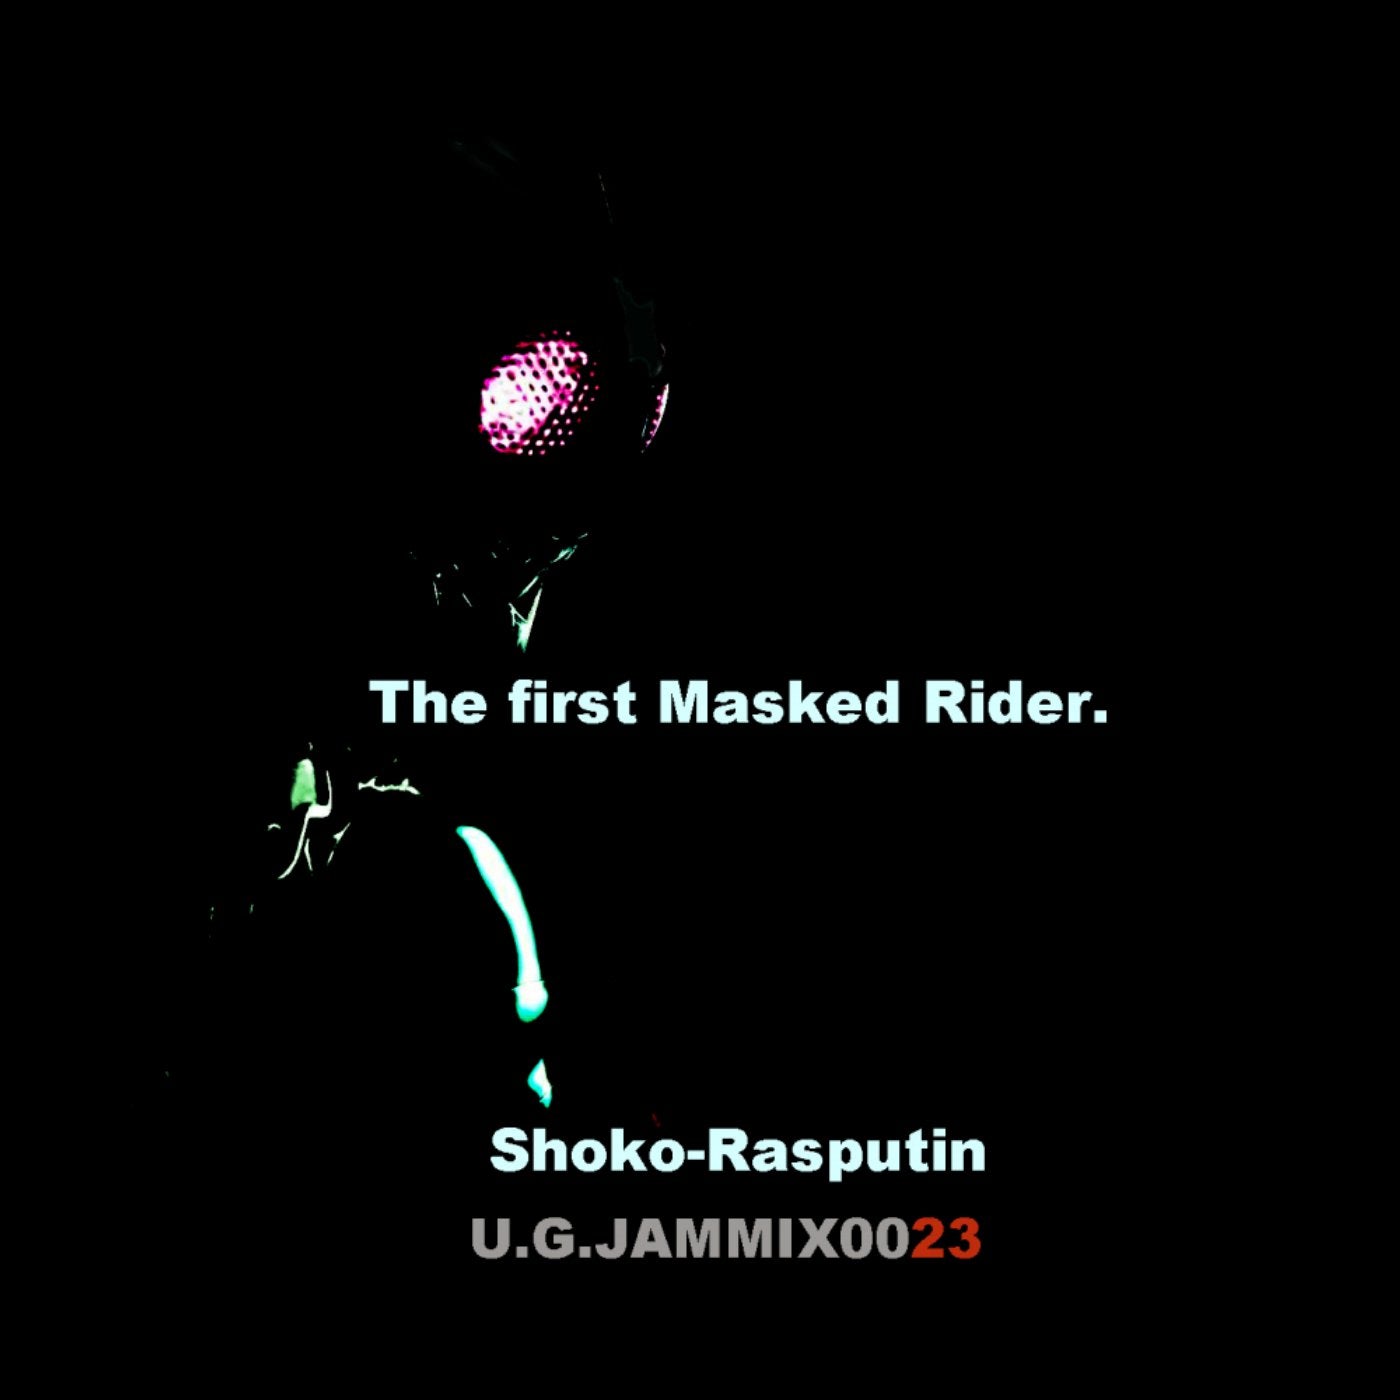 The First Masked Rider